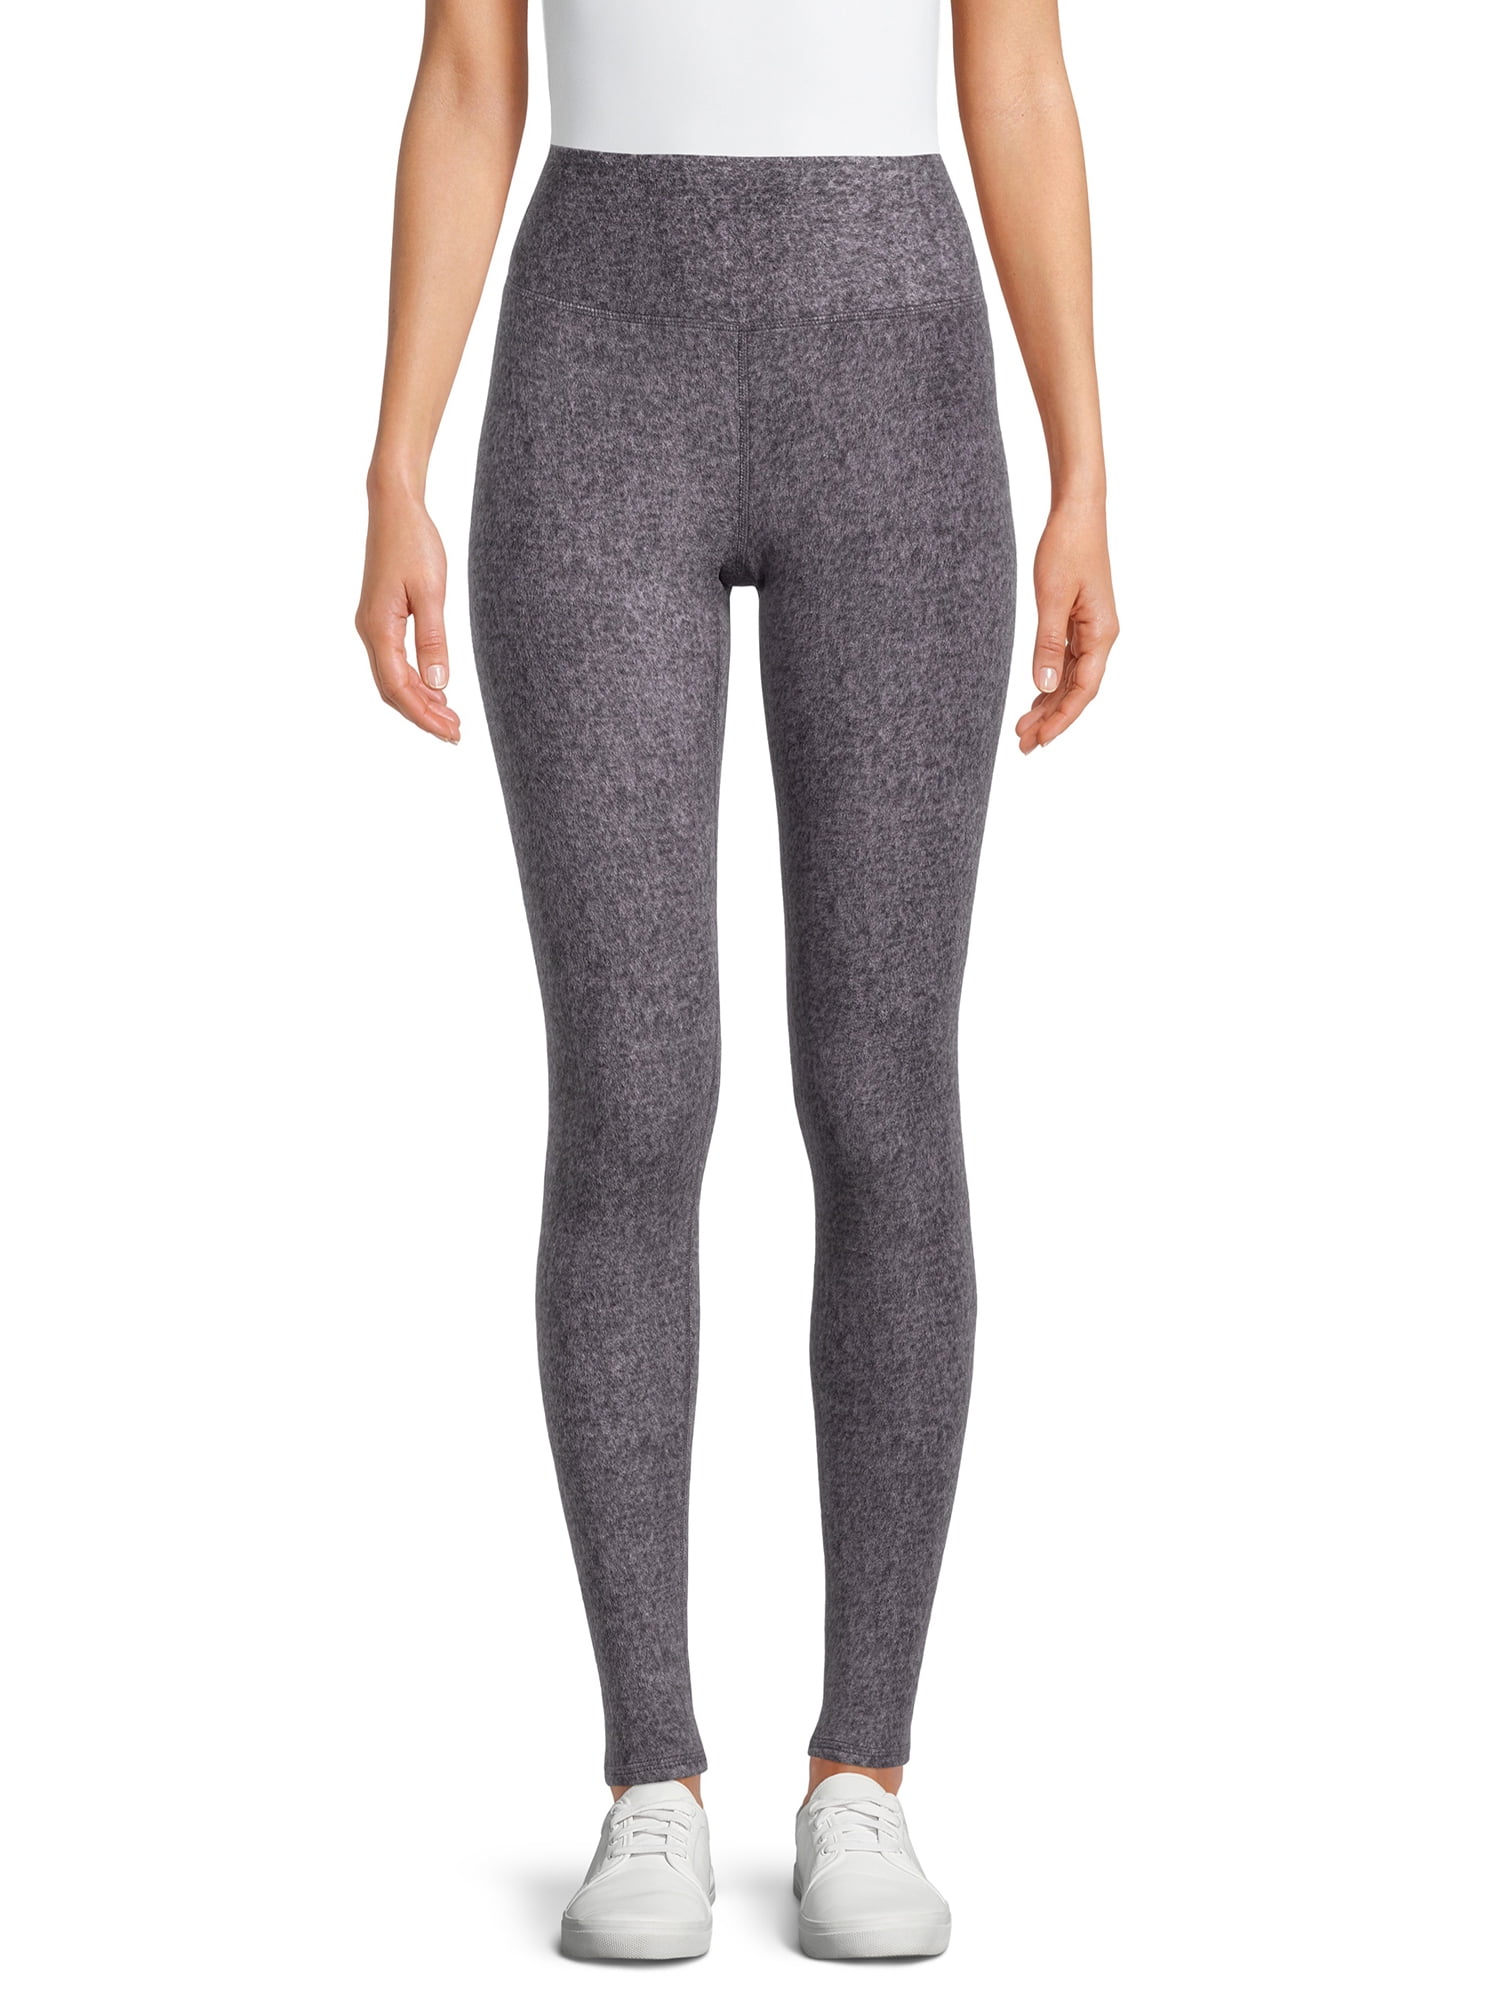 Climateright by Cuddl Duds Women's Fleece Thermal Leggings - Walmart.com